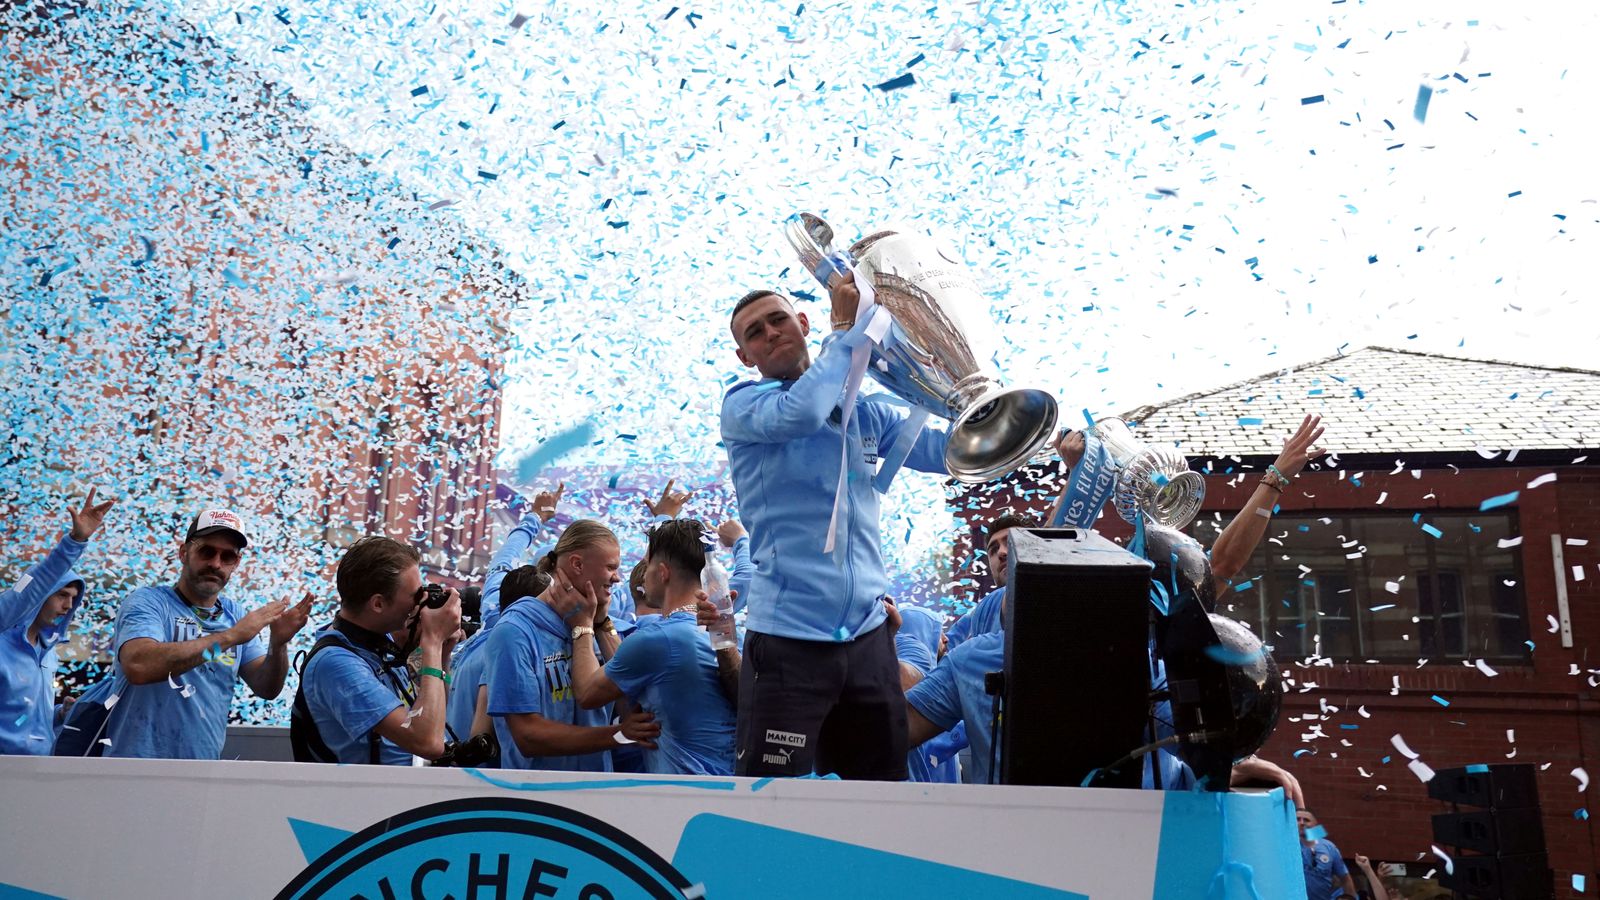 Manchester City Thousands of fans watch team celebrate Treble with bus